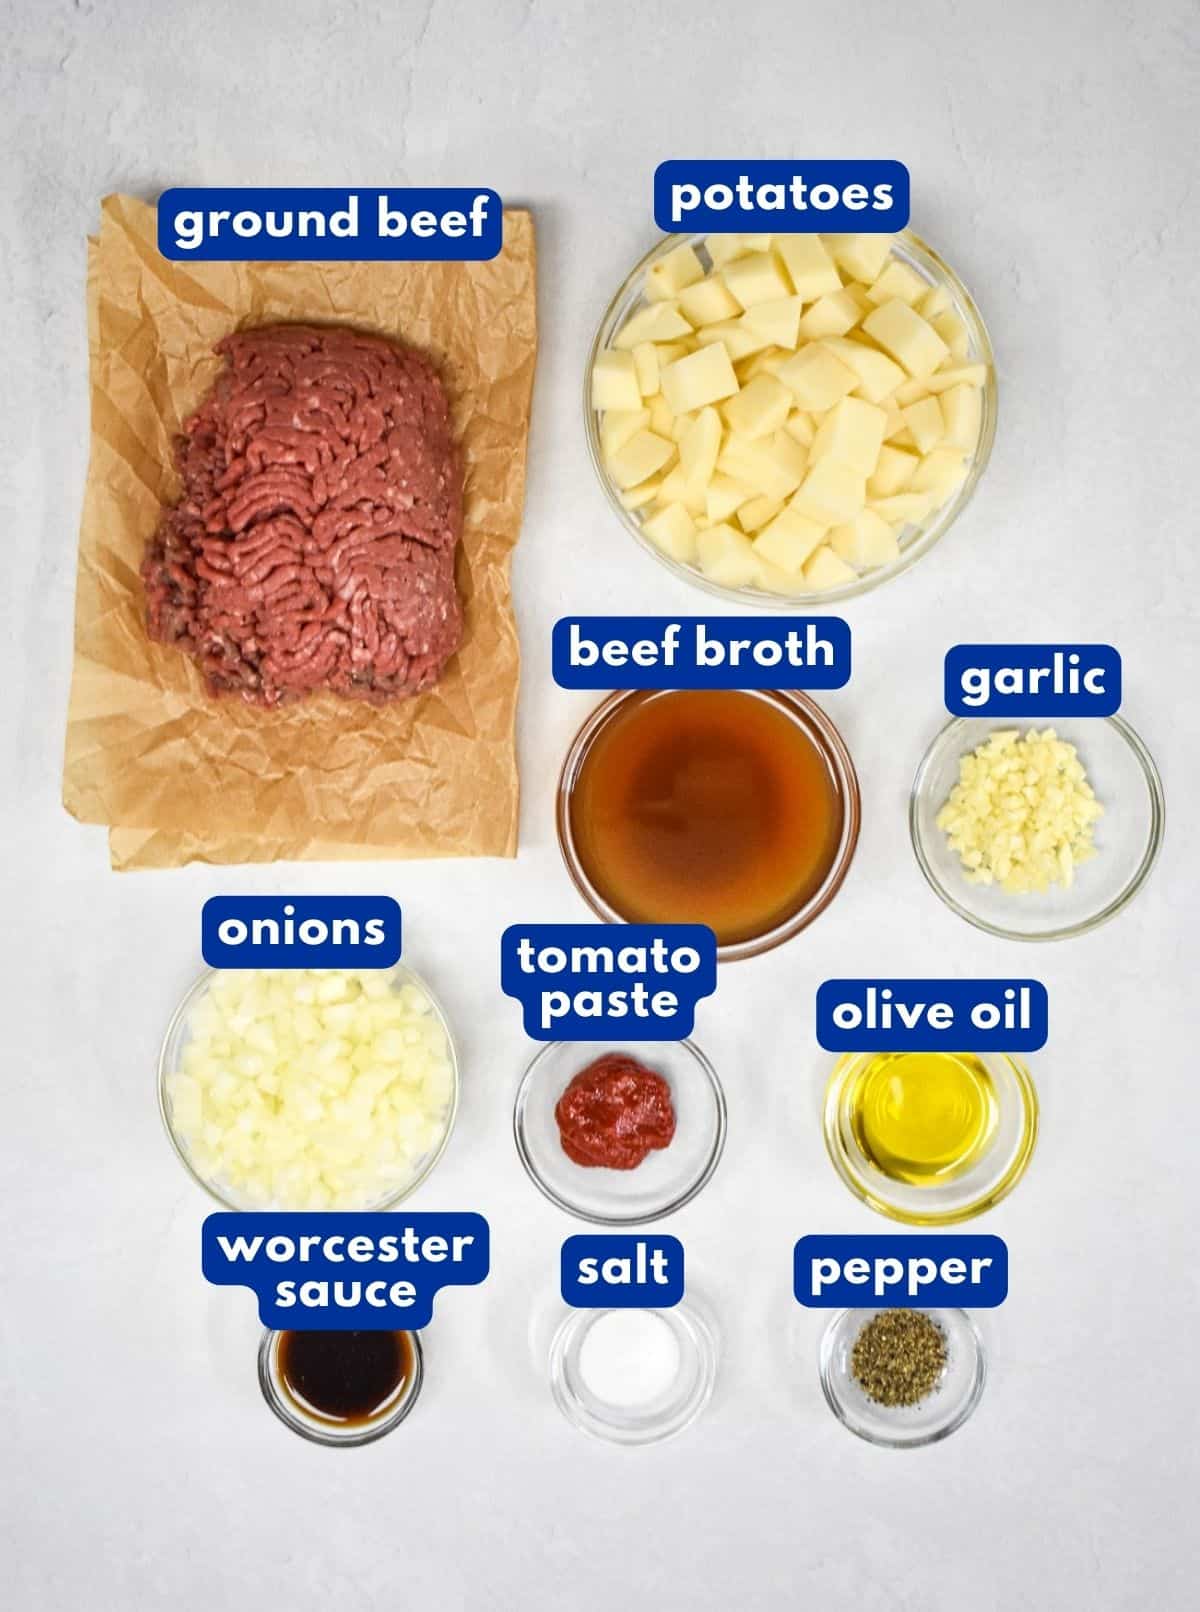 The ingredients for the ground beef and potatoes skillet prepped and arranged on a white table with each labeled in blue and white letters.